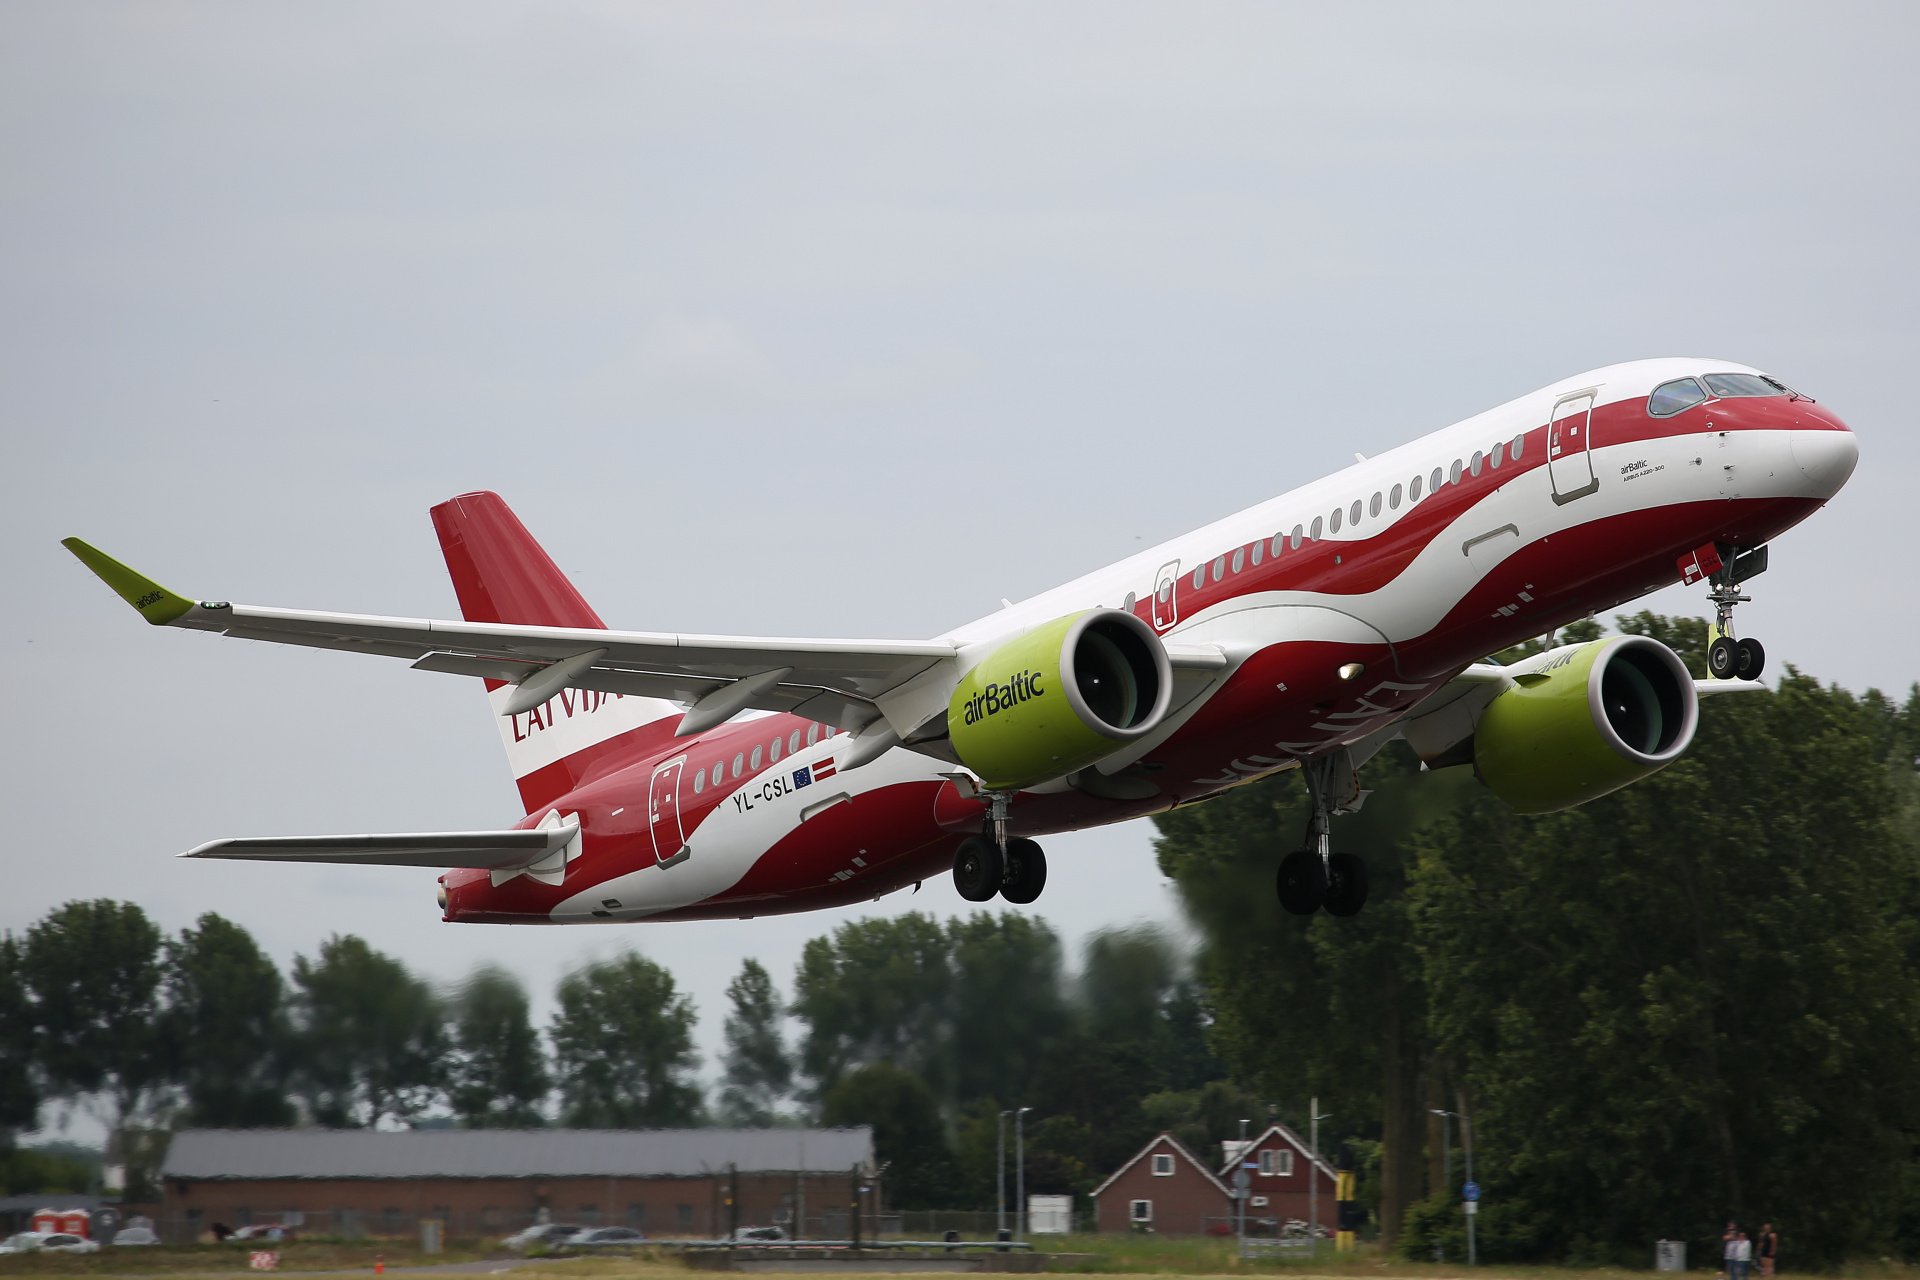 YL-CSL, airBaltic (Latvia flag livery) (Aircraft » Schiphol Spotting » Airbus A220-300)